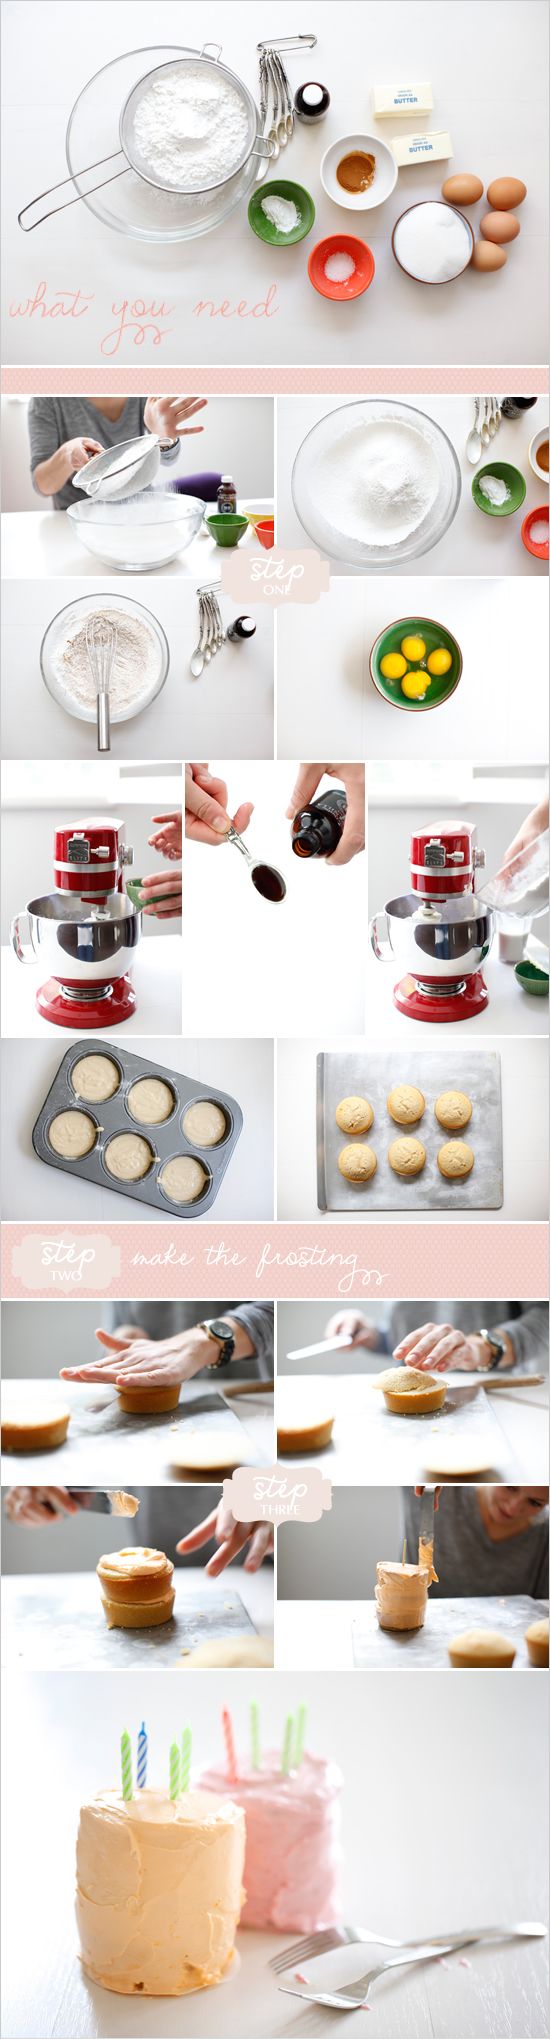 how to make mini cakes using a muffin pan